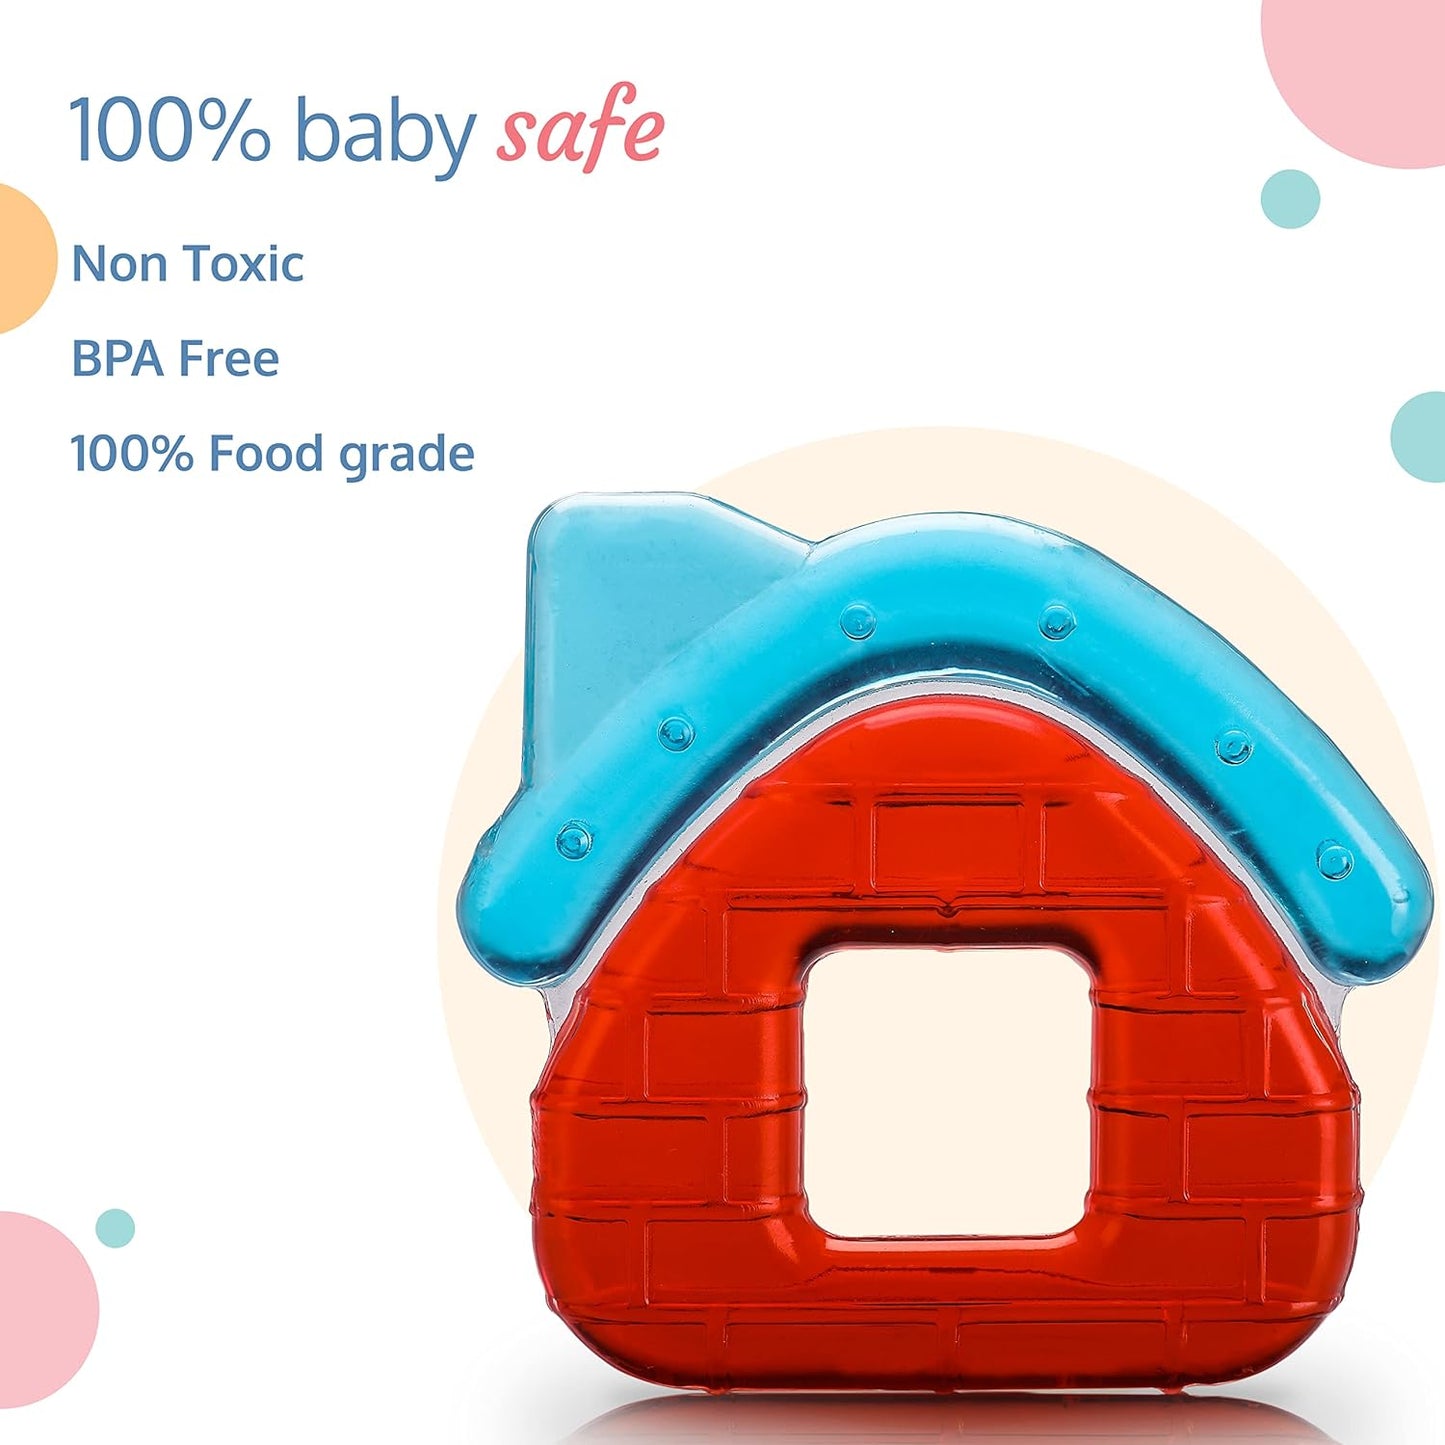 Luv Lap Silicone Water-Filled Teether - Distilled Water Infused for Soothing Baby Gums, BPA-Free, Odorless, Easy-Grip Design for Infants, Vibrant Multicolor House Shape, Suitable for 3 Months and Up